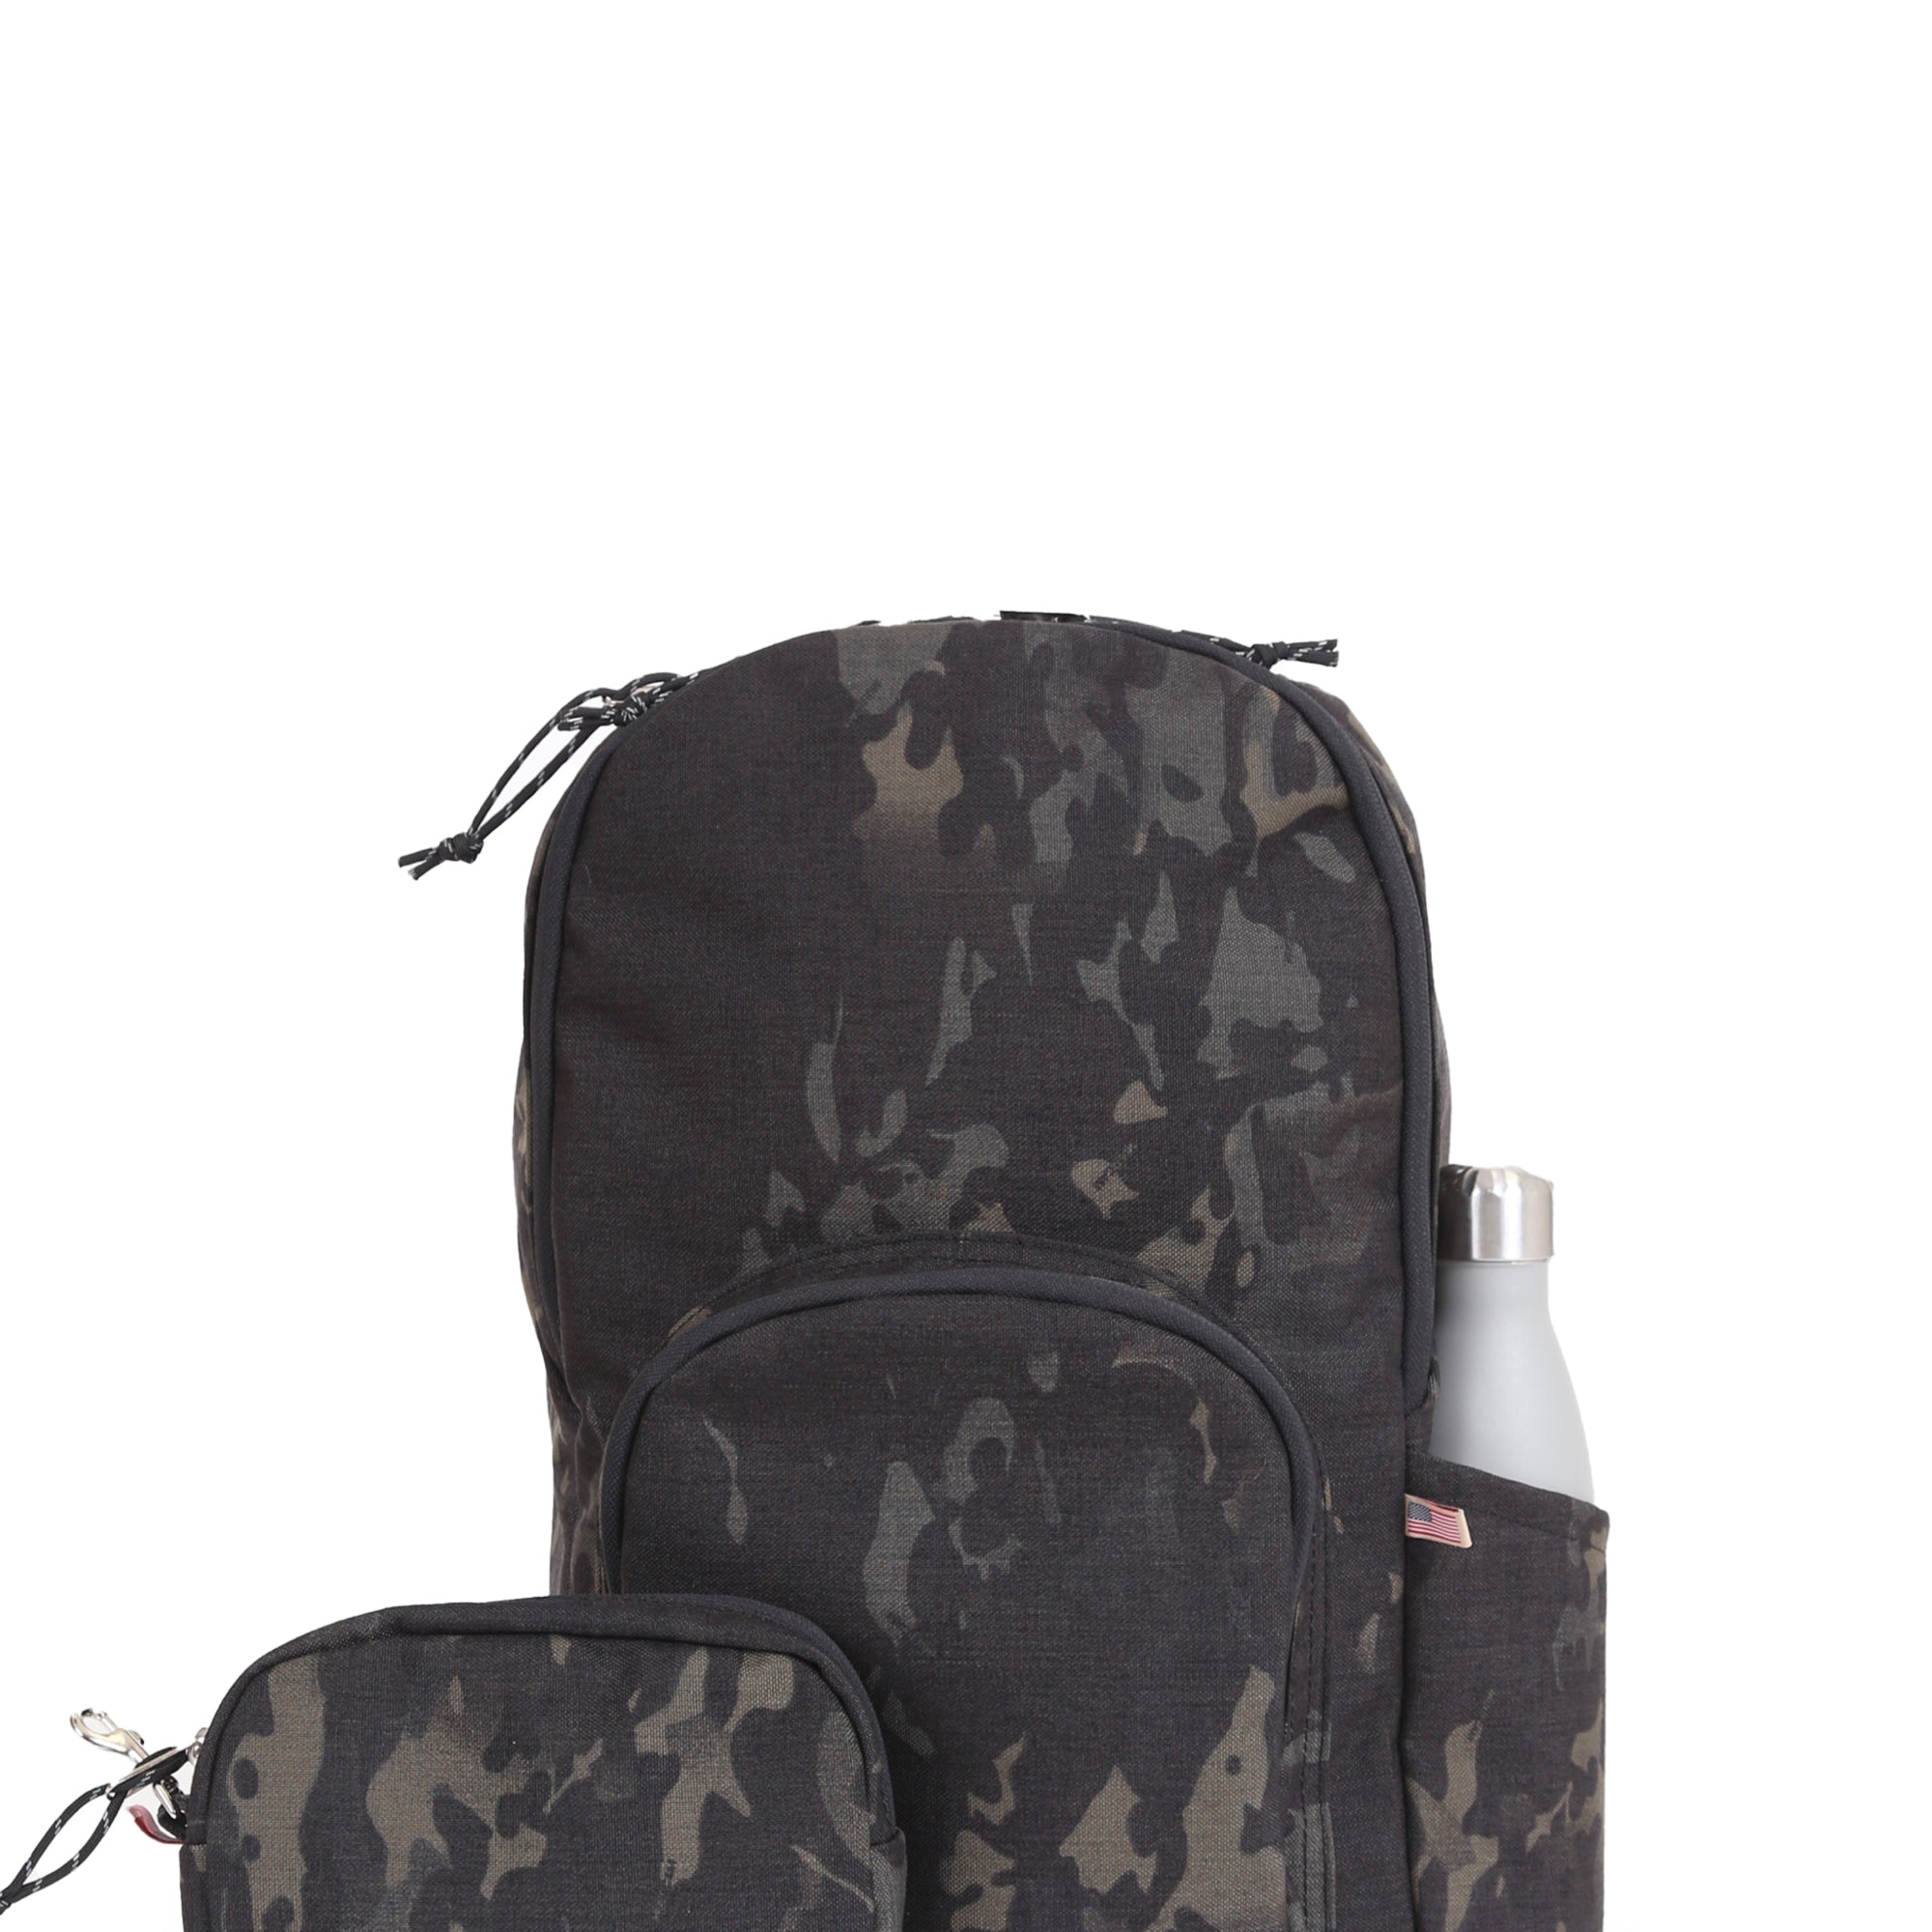 ALAZA Camouflage Desert Camo Women Backpack Purse Ladies Fashion Shoulder  Bag Daypack Travel Bag 10L : Clothing, Shoes & Jewelry - Amazon.com